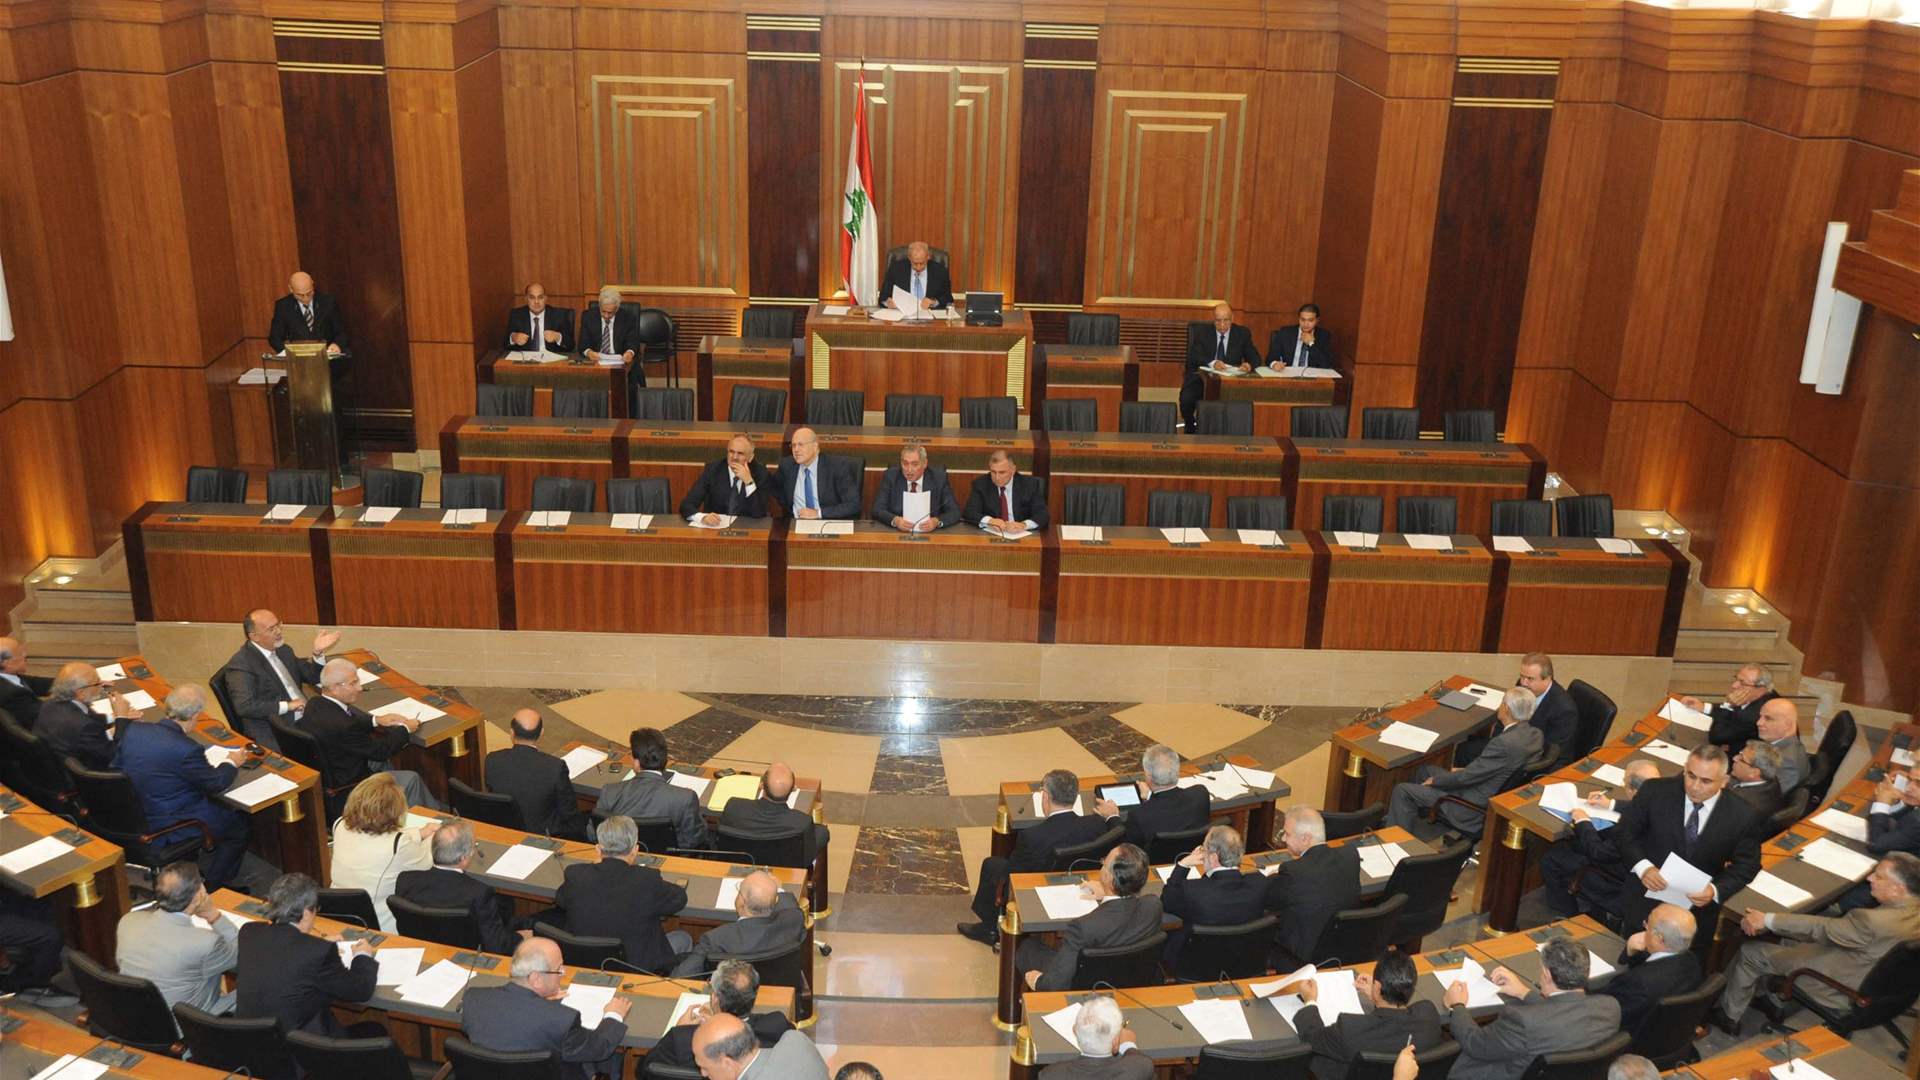 Parliament session: Bassil confirms FPM will not participate unless emergency arises 